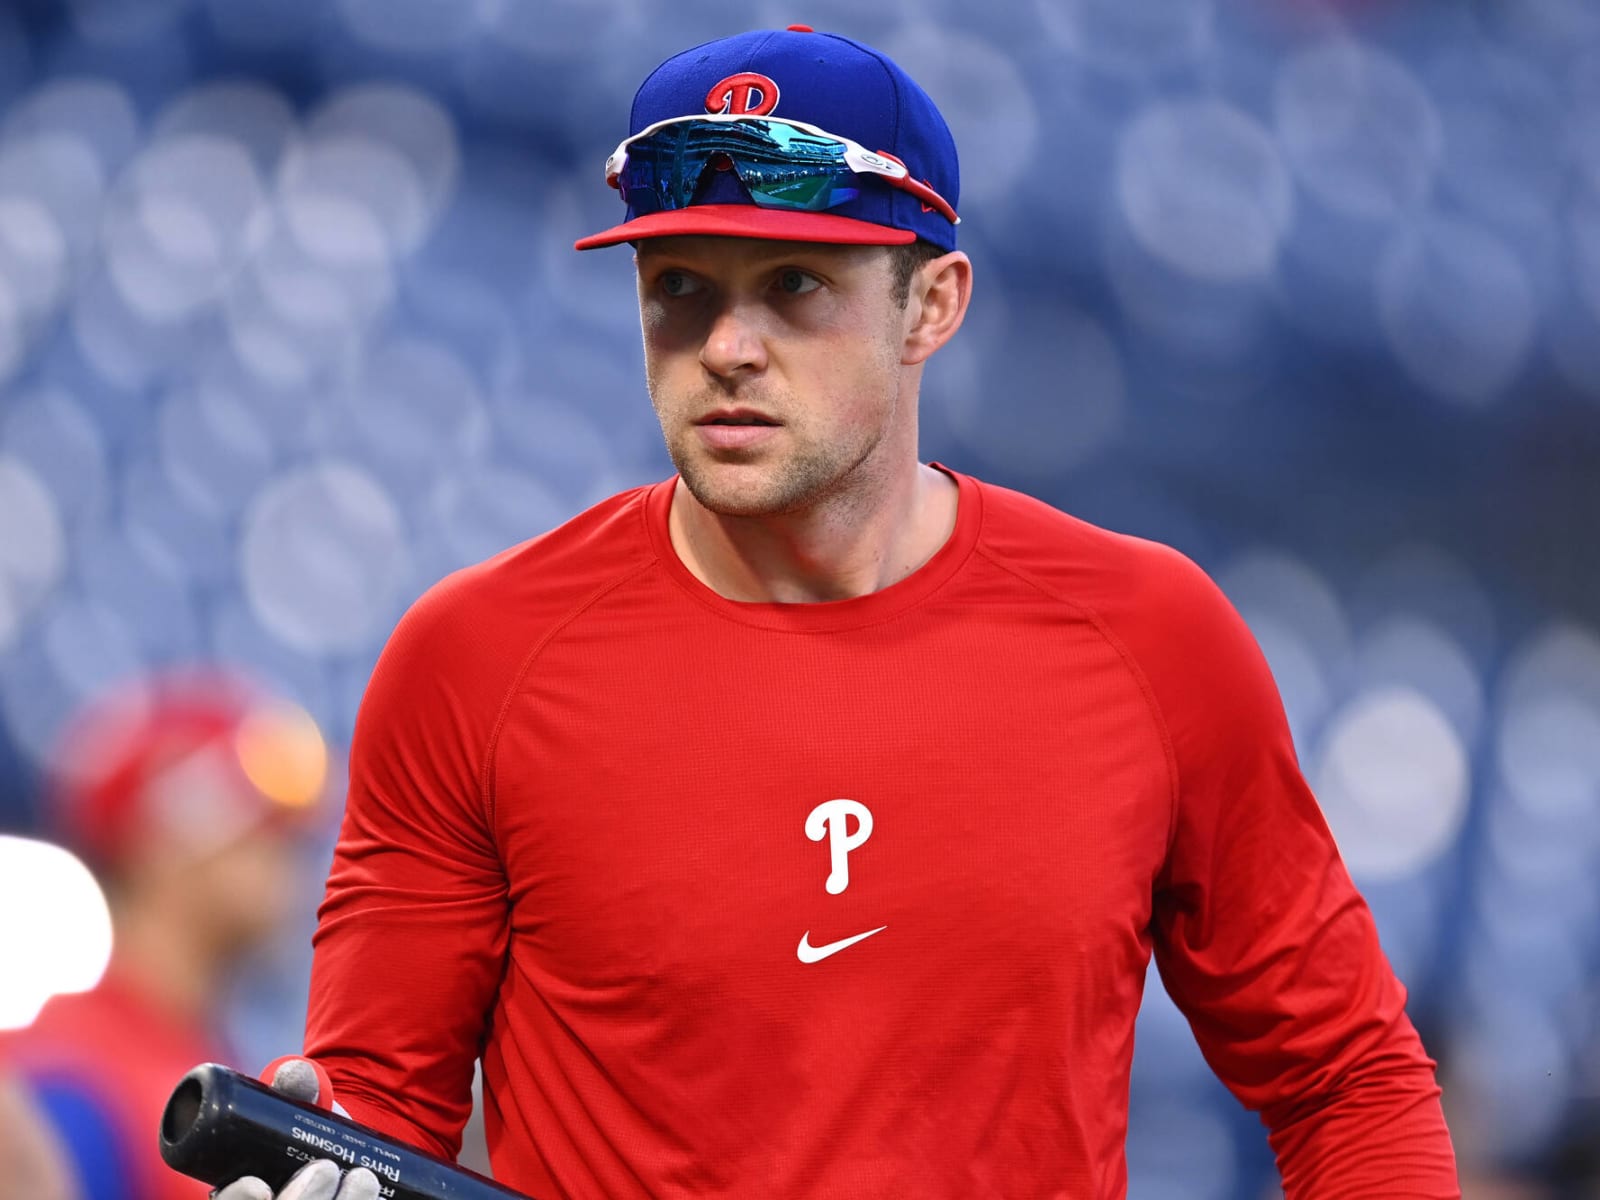 Phillis' Rhys Hoskins (knee) to undergo ACL reconstruction surgery